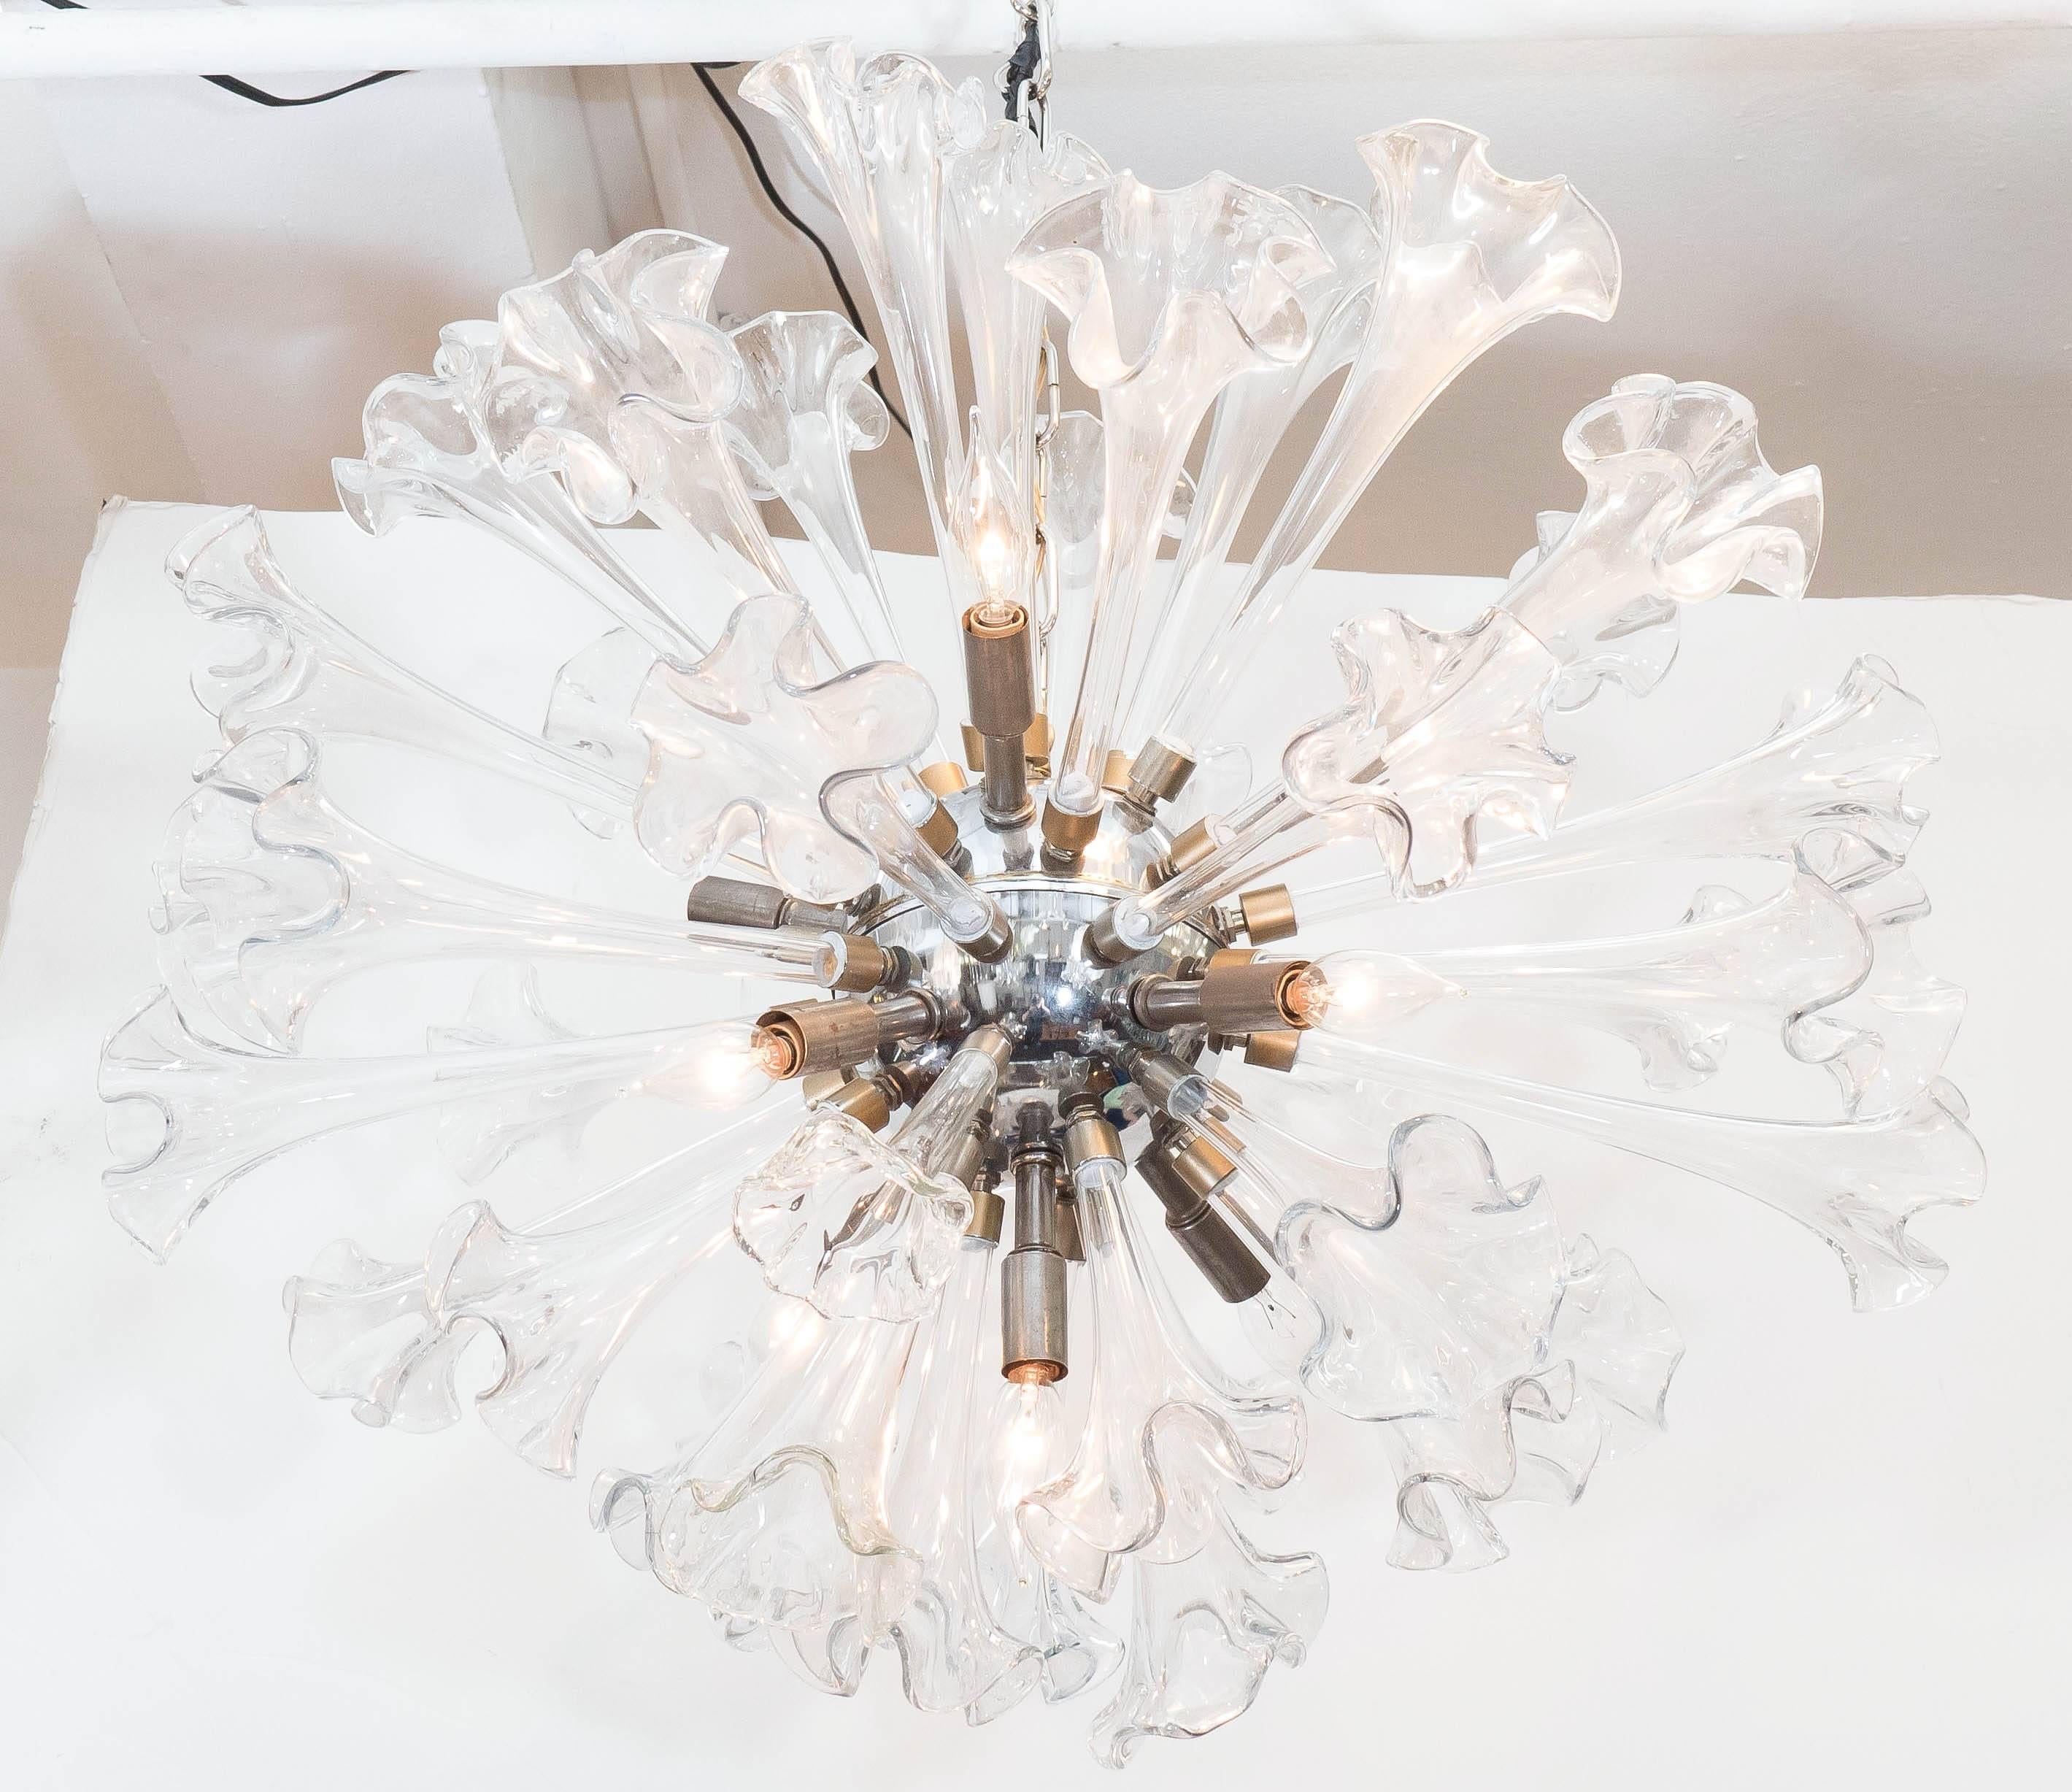 Sputnik chandelier, produced circa 1960s, features lengthy Murano glass ruffled trumpet lilies, surrounding a metal nucleus. Wiring to US standard. Very good vintage condition, with age appropriate wear to metal hardware.